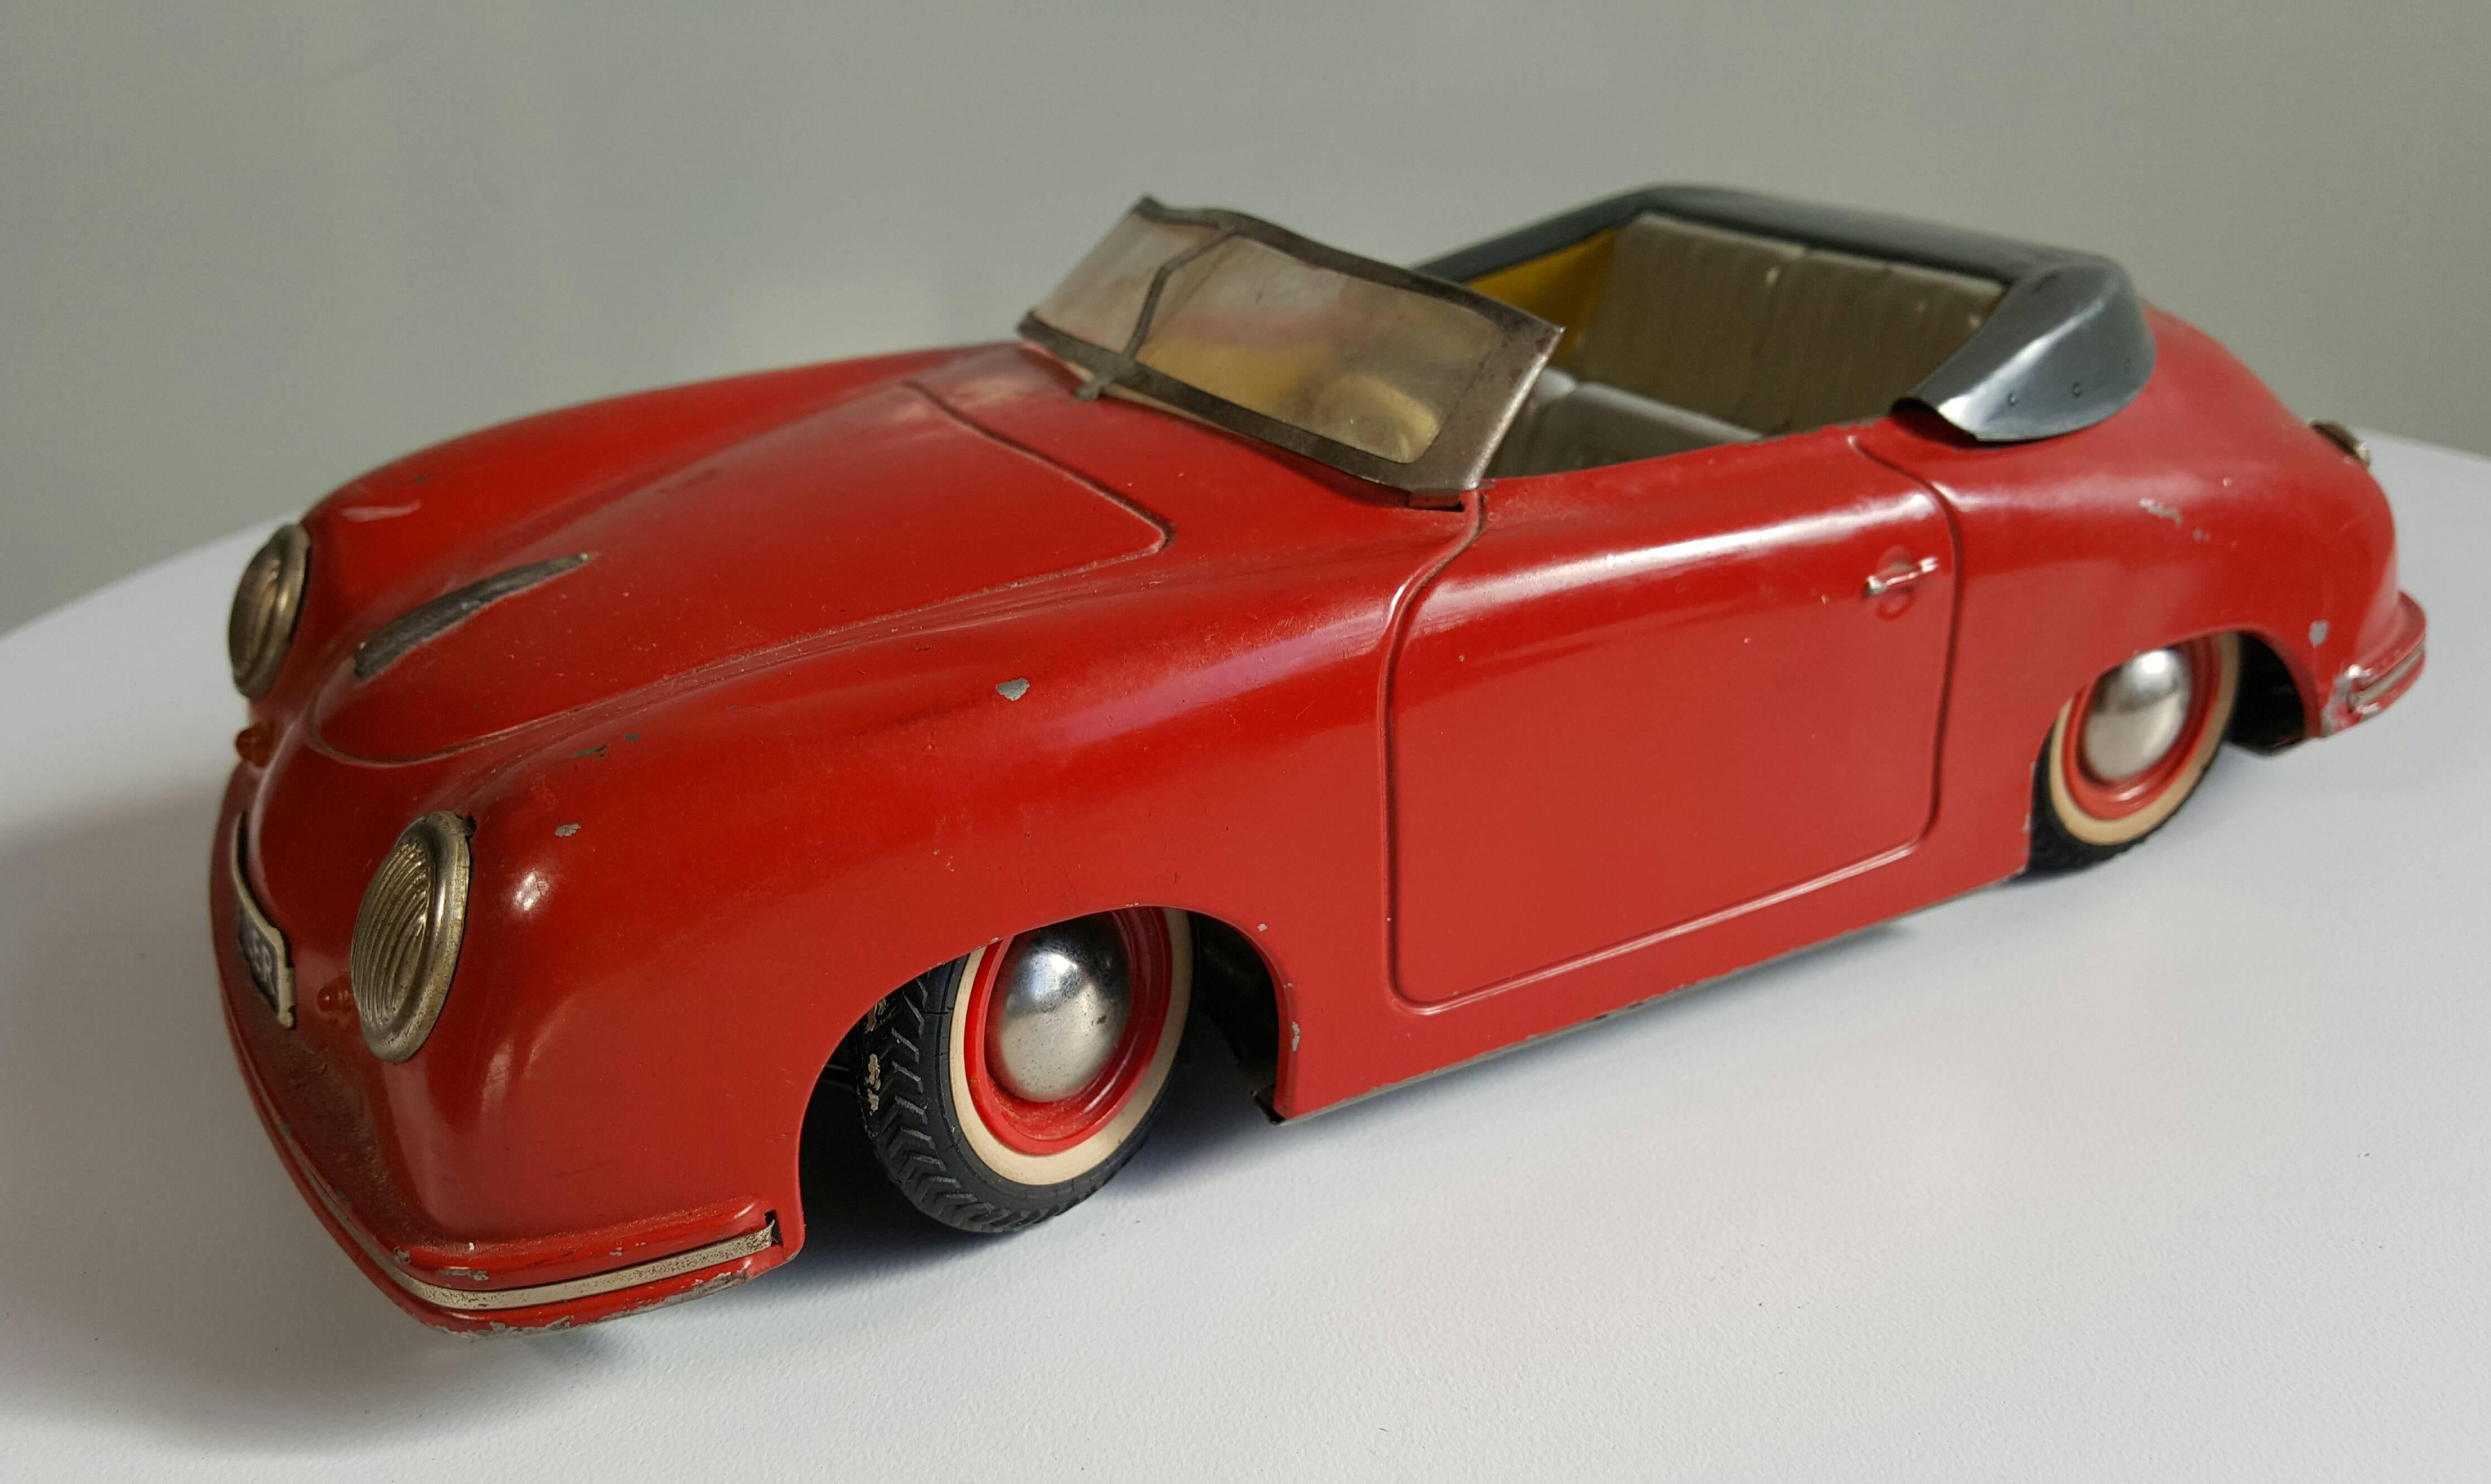 1950s Distler Porsche 356 electromatic 7500 Germany friction toy. Nice early model made in the 1950s, Germany. Features working steering wheel,, stick shift.